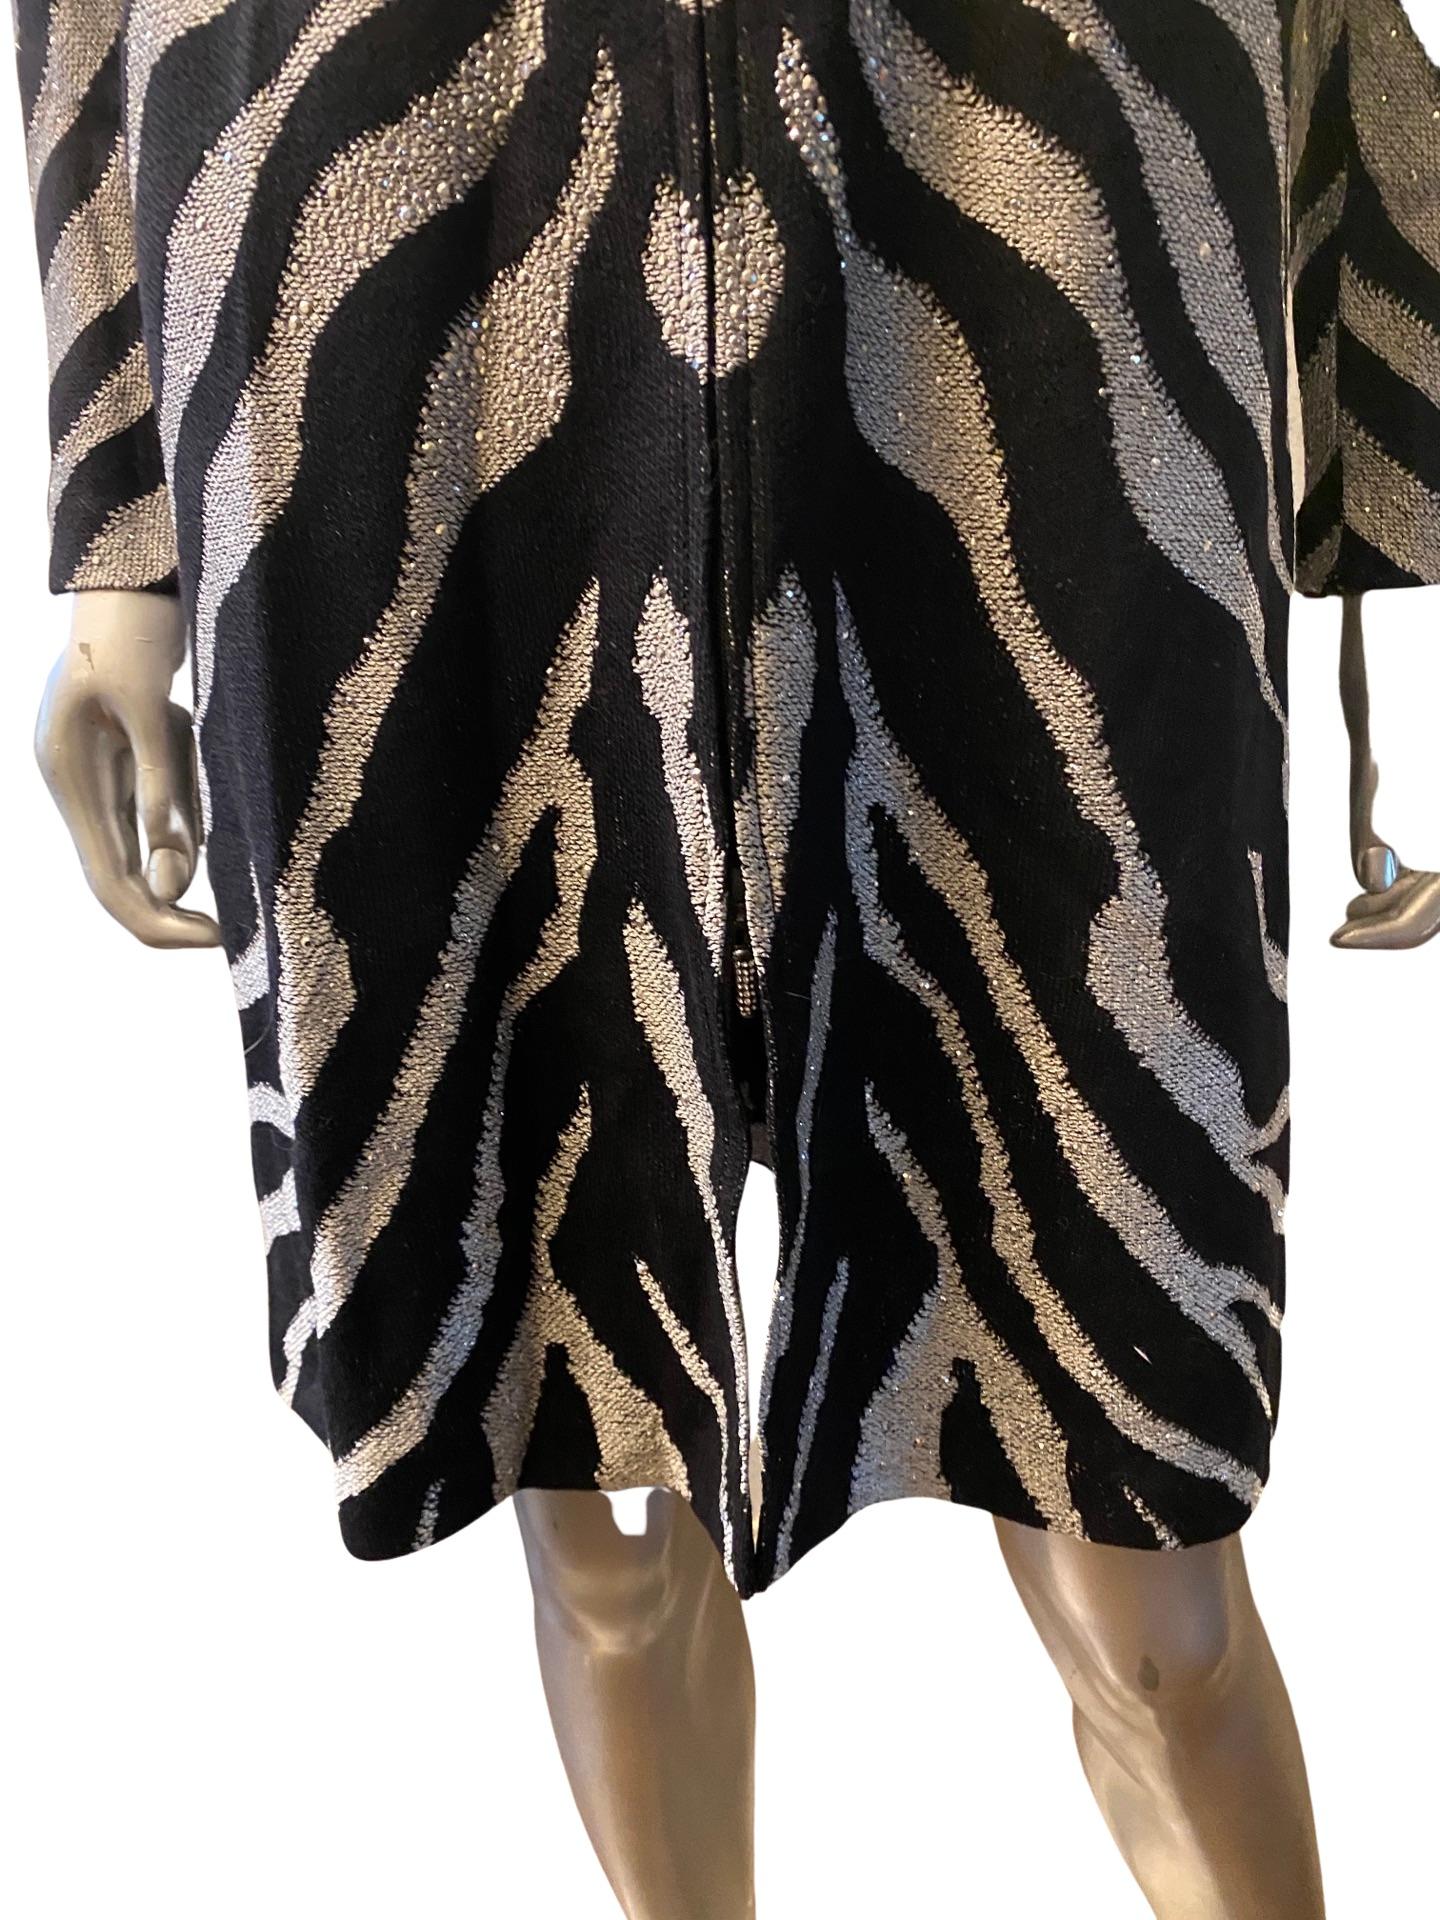 St John Evening Zebra Knit Zip Front Dress with Silver Beading Size 2 NWT For Sale 6